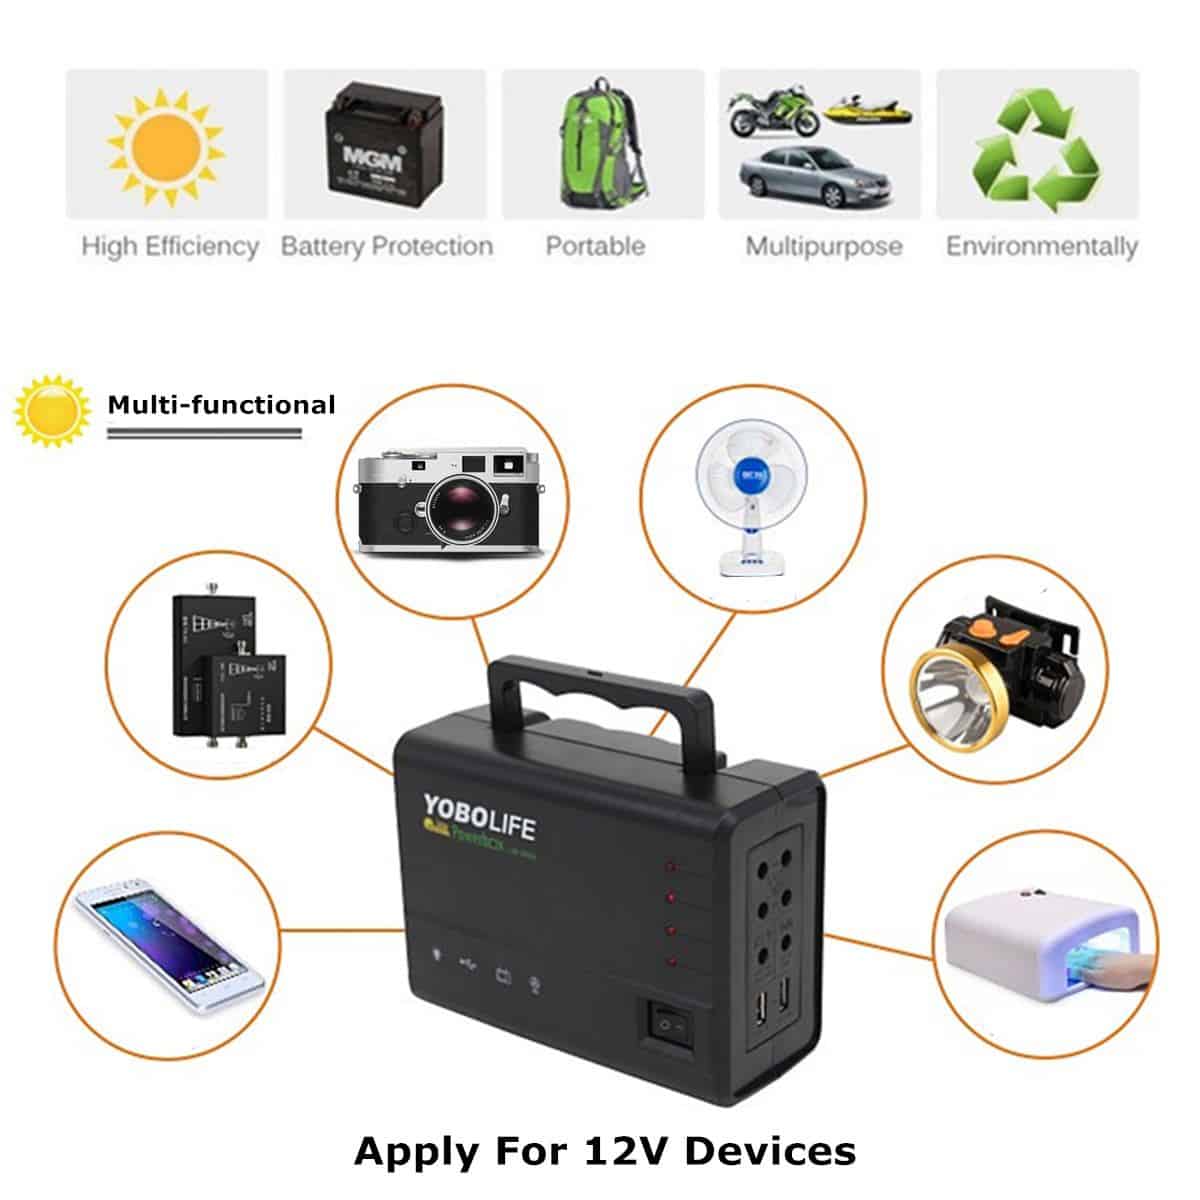 LED Light USB Charger 18V Solar Panel Power Storage Generator Home System Kit Rechargeable Sealed Lead-acid Battery ABS+PC 10W